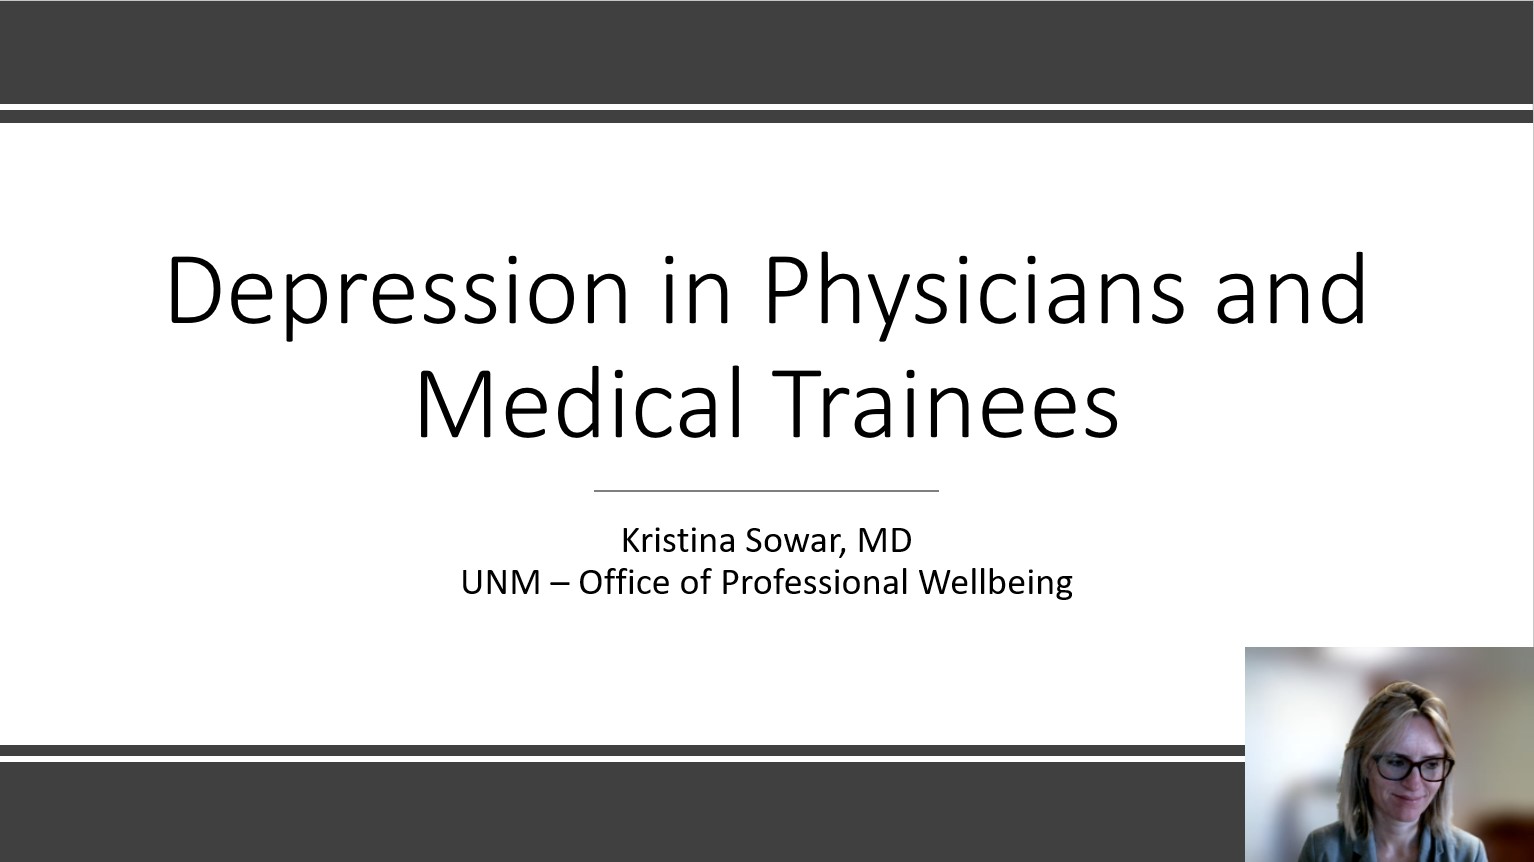 Depression in Physicians and Medical Trainees